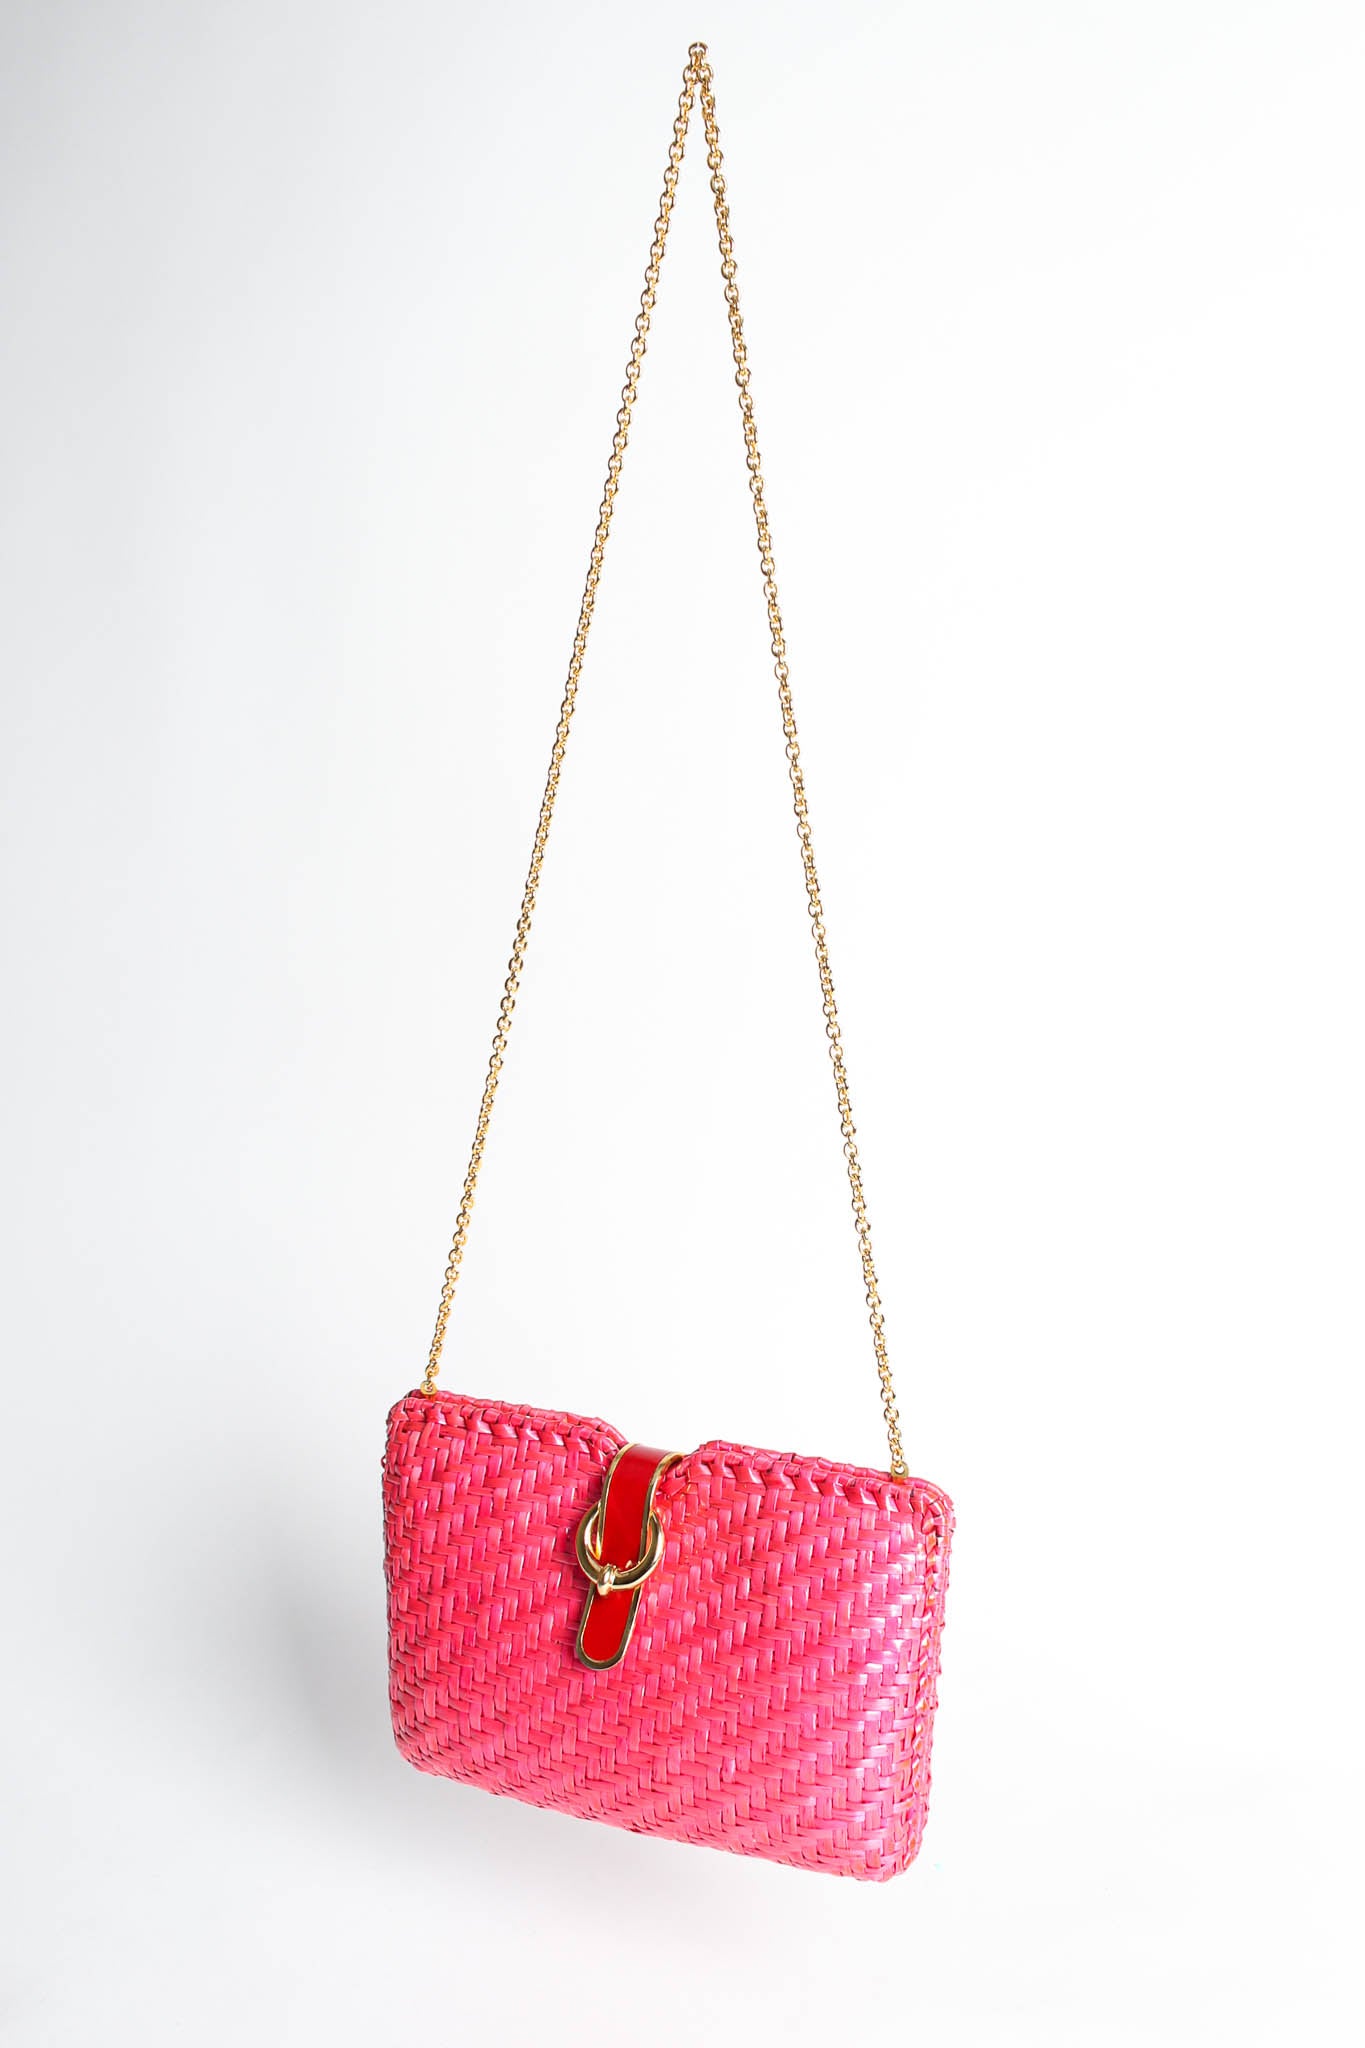 Vintage Rodo Woven Straw Shoulder Clutch angle hanging @ Recess Los Angeles